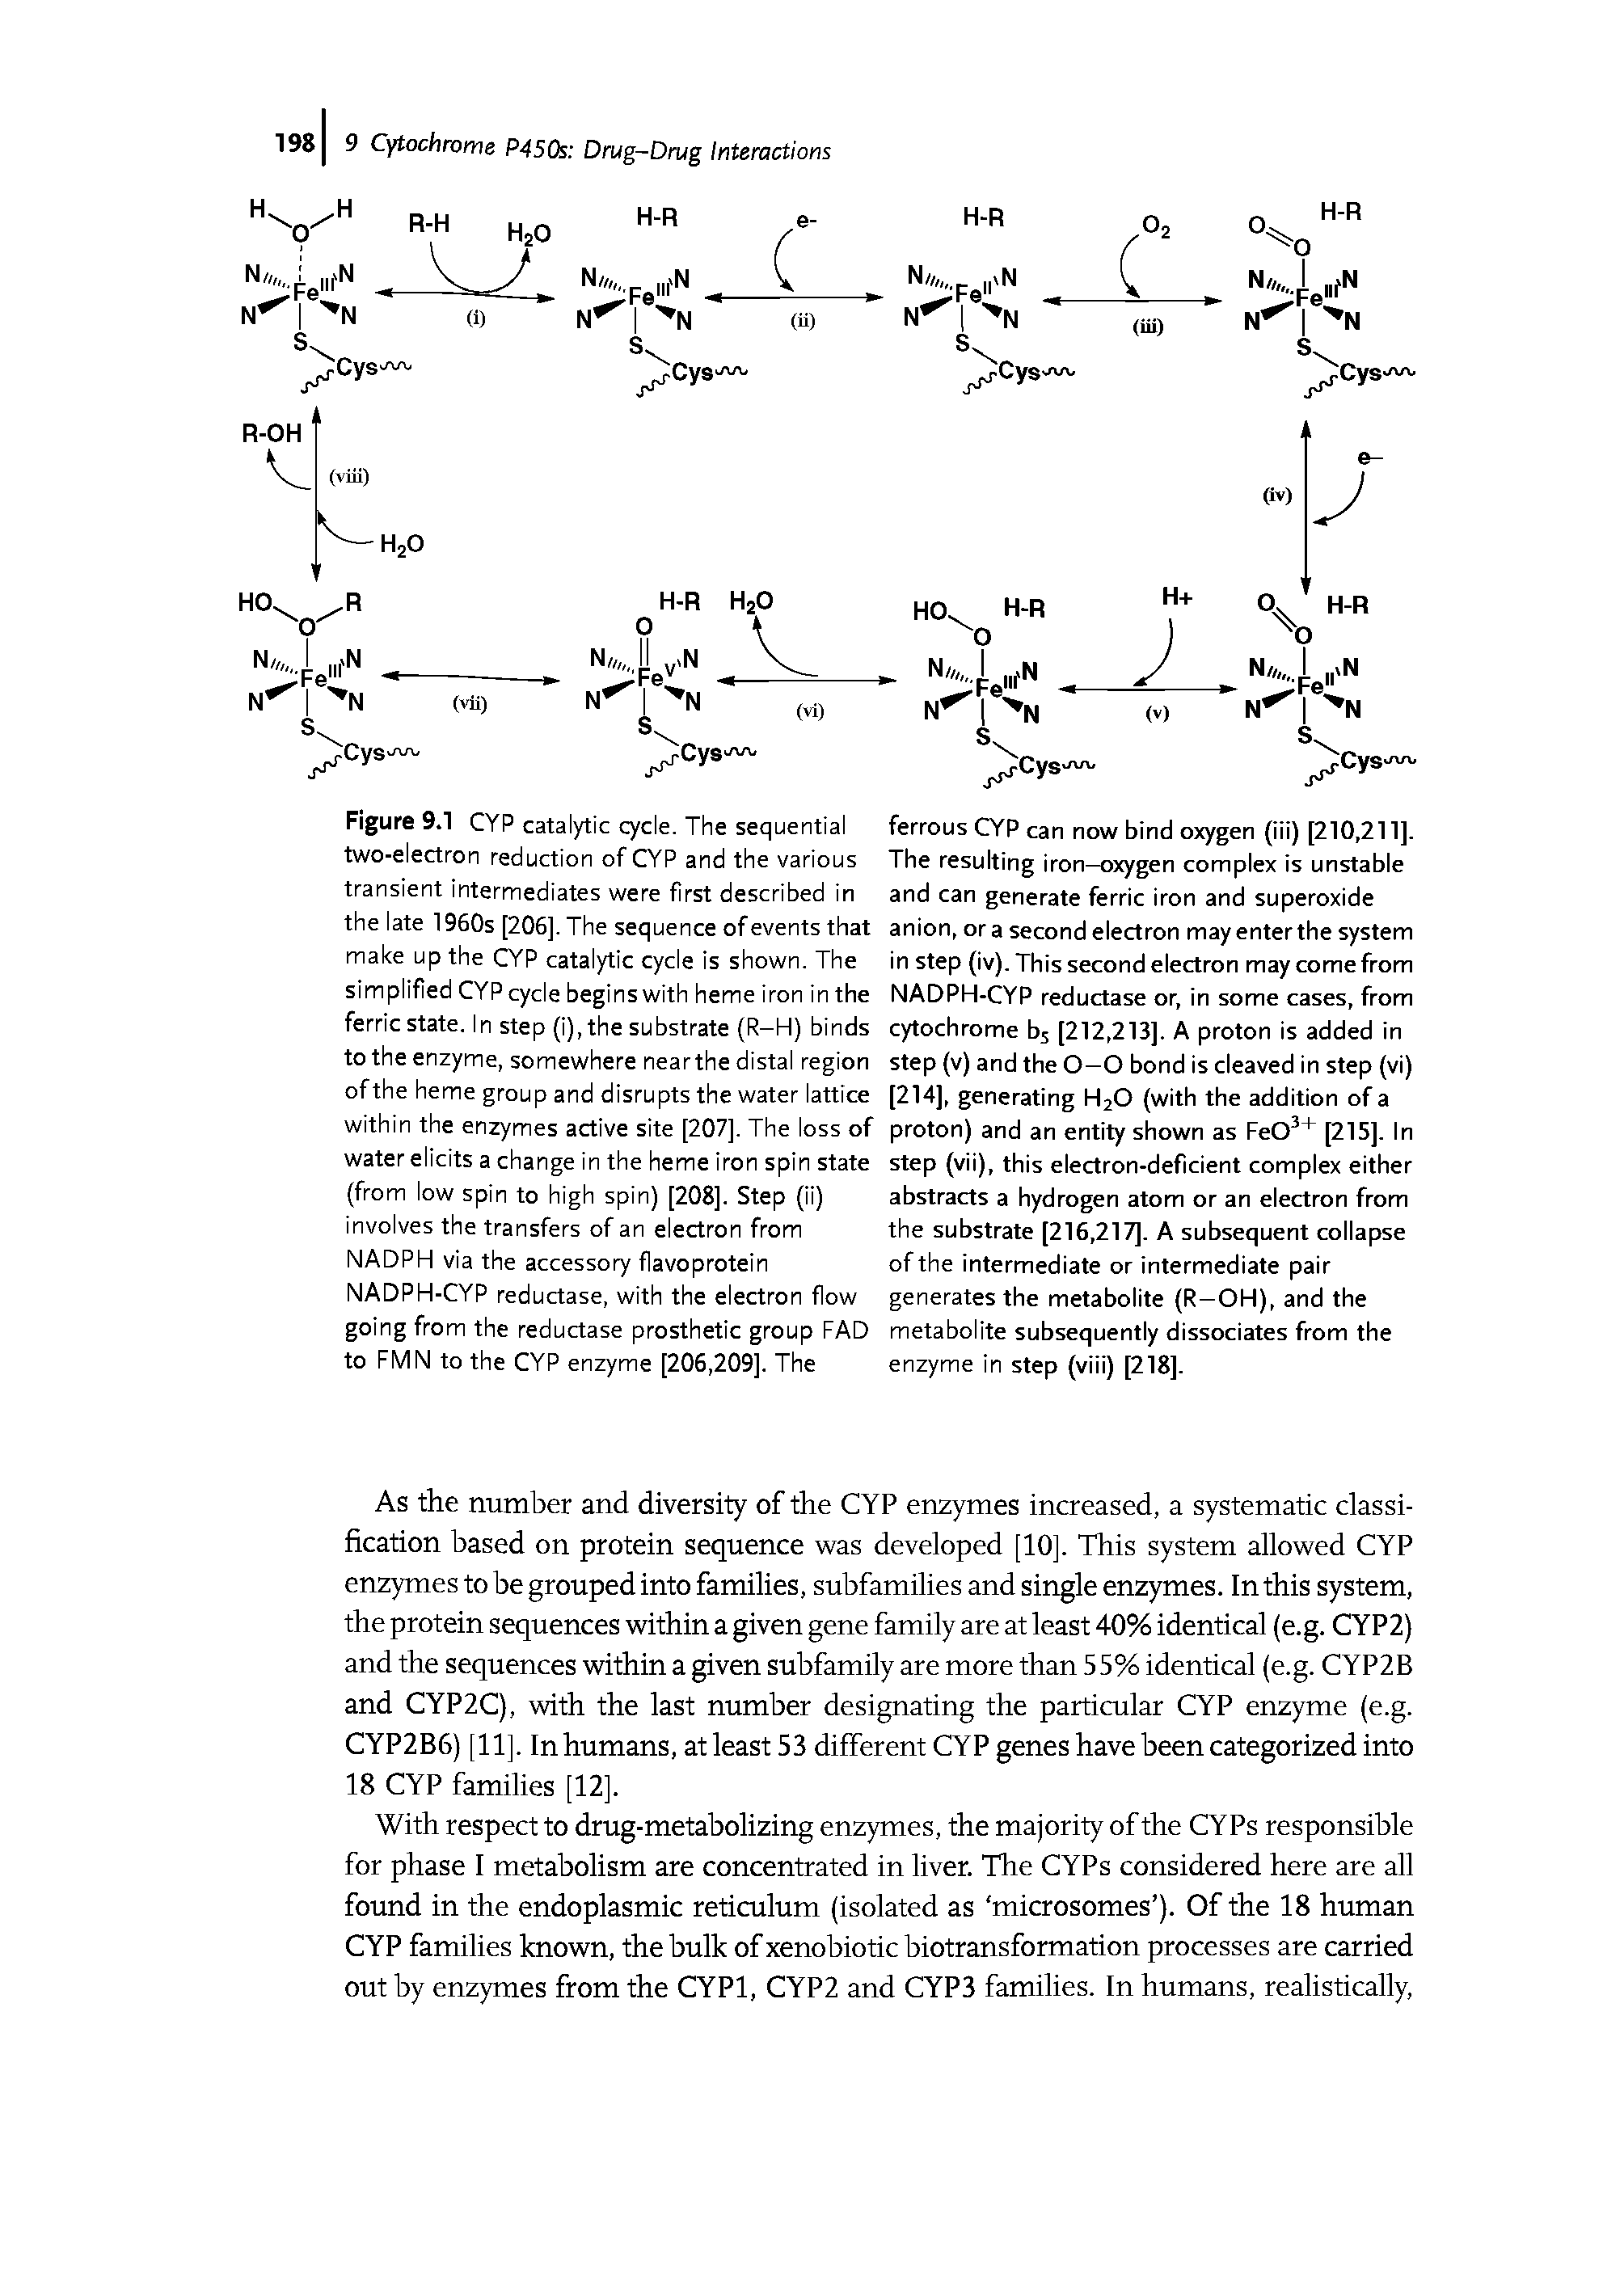 Figure 9.1 CYP catalytic cycle. The sequential two-electron reduction of CYP and the various transient intermediates were first described in the late 1960s [206], The sequence of events that make up the CYP catalytic cycle is shown. The simplified CYP cycle begins with heme iron in the ferric state. In step (i), the substrate (R—H) binds to the enzyme, somewhere nearthe distal region of the heme group and disrupts the water lattice within the enzymes active site [207], The loss of water elicits a change in the heme iron spin state (from low spin to high spin) [208]. Step (ii) involves the transfers of an electron from NADPH via the accessory flavoprotein NADPH-CYP reductase, with the electron flow going from the reductase prosthetic group FAD to FMN to the CYP enzyme [206,209]. The...